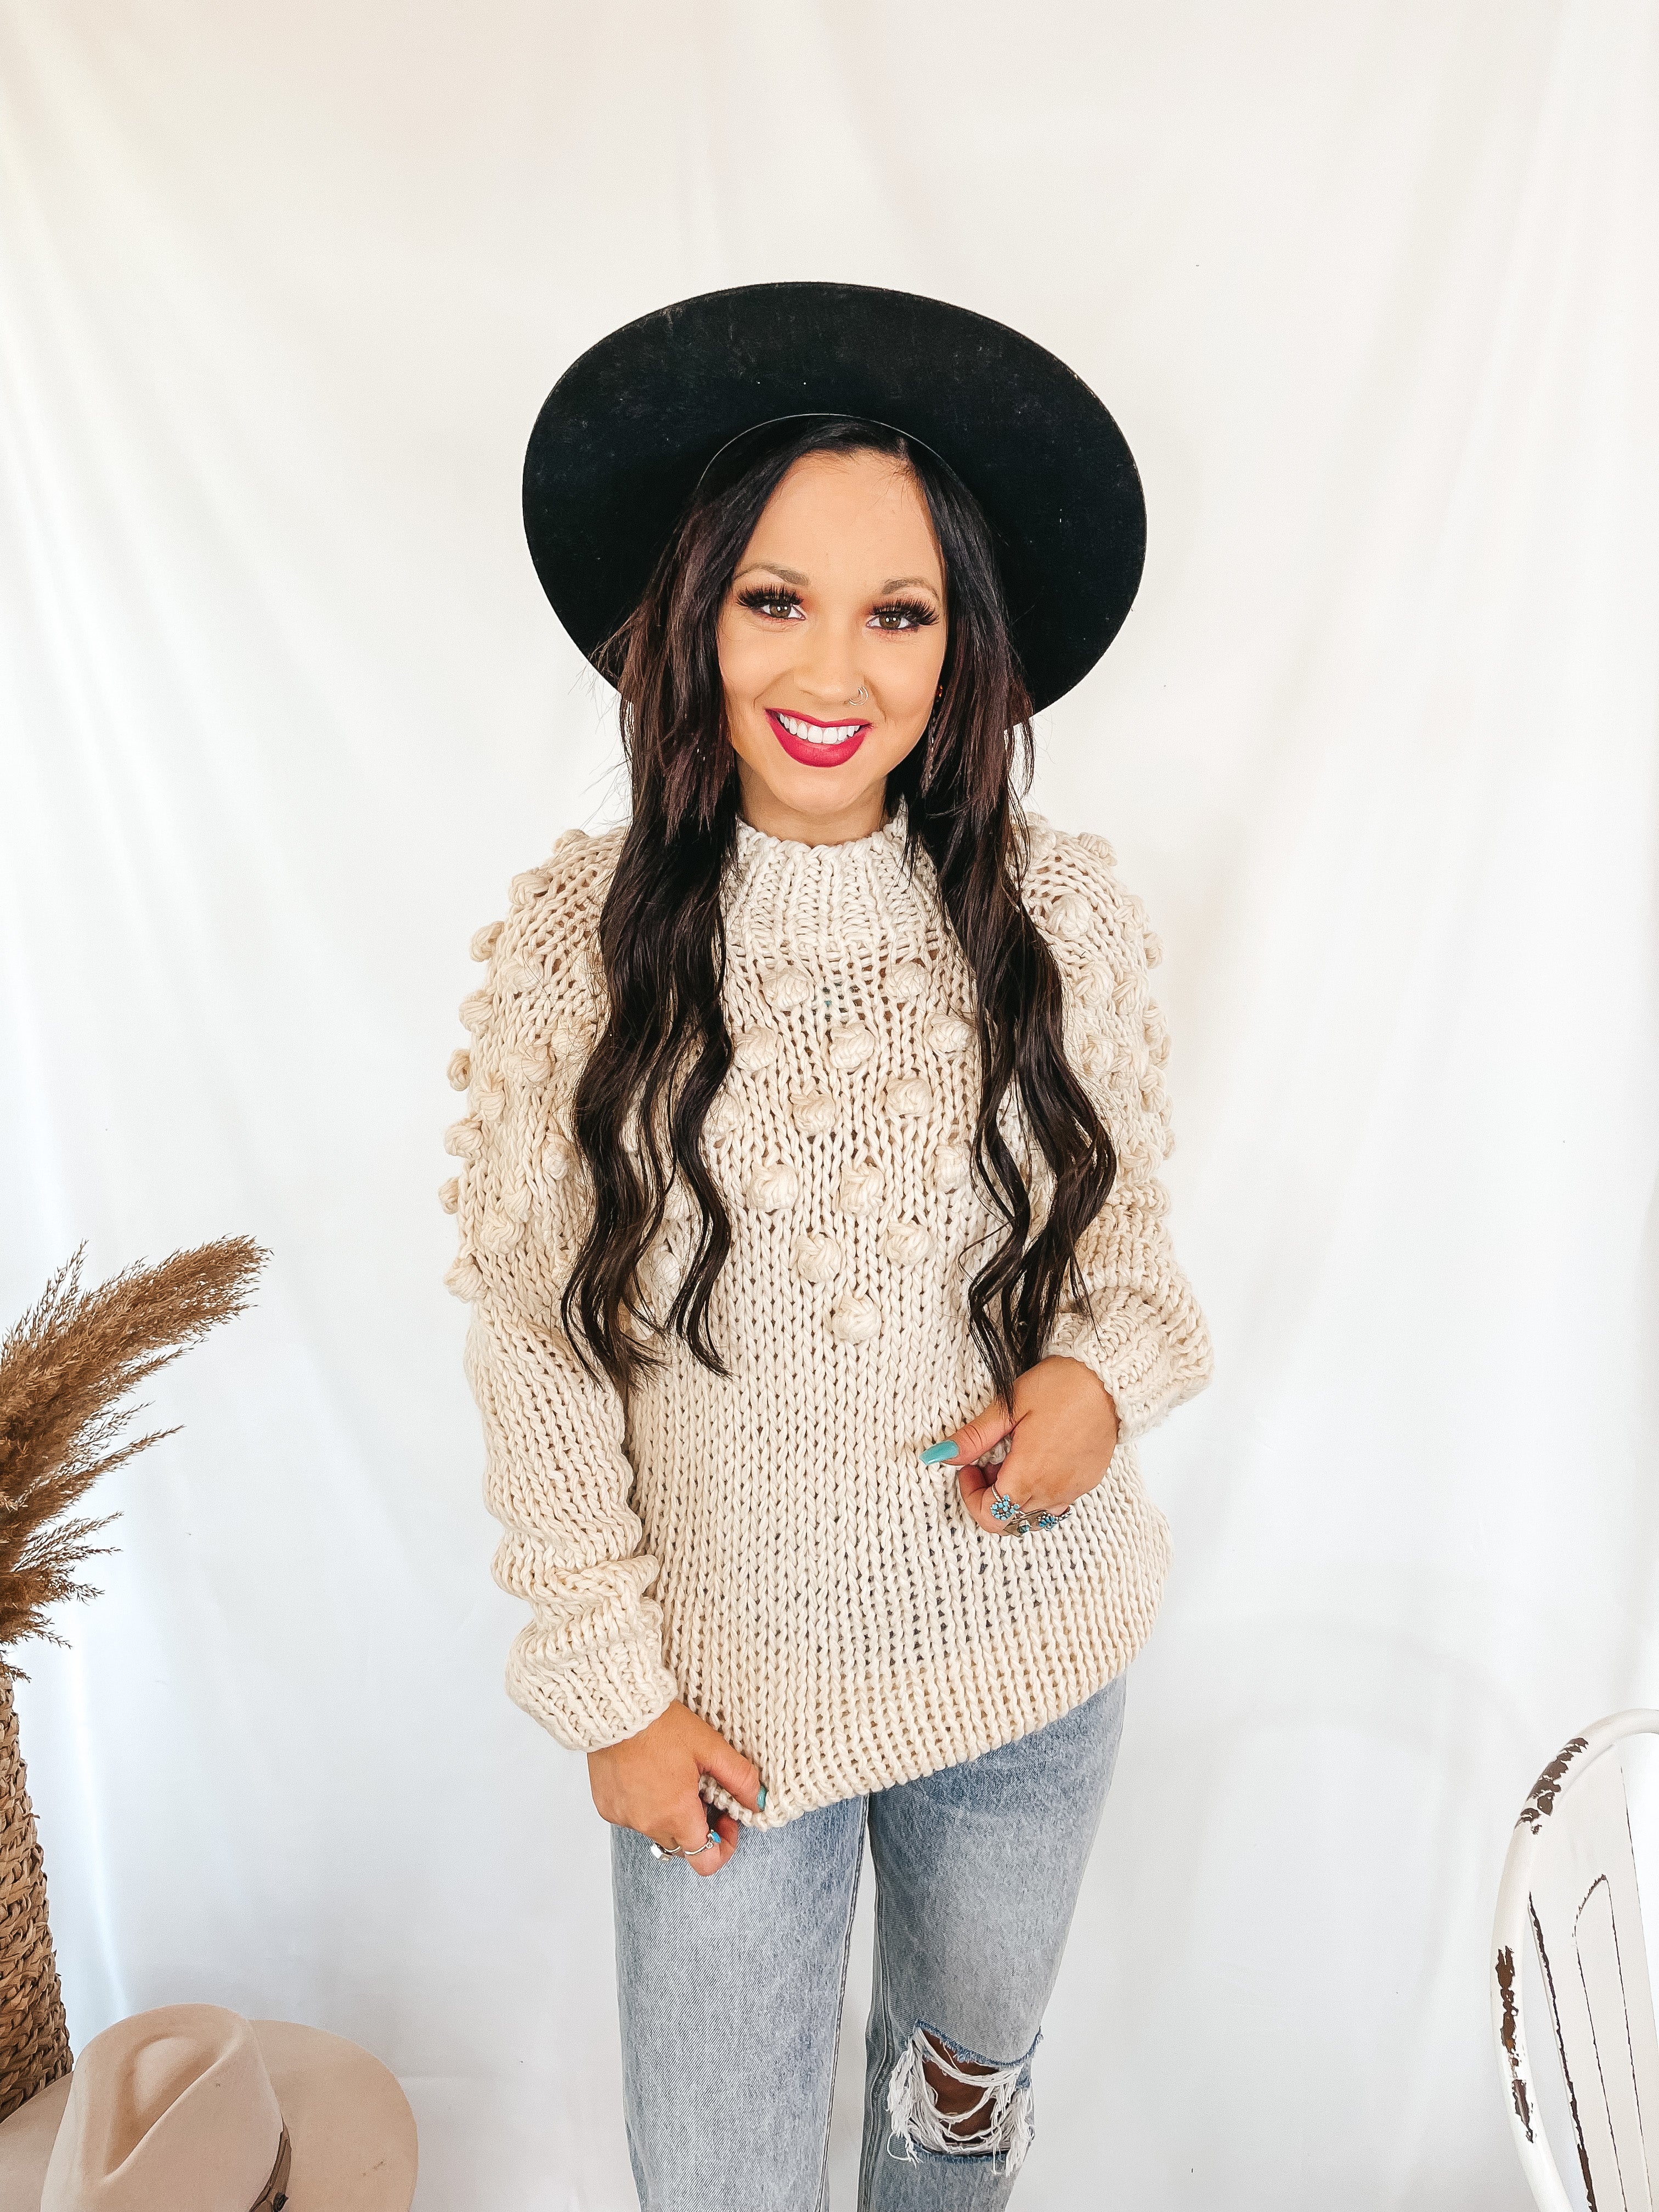 Puff of Magic High Neck Sweater with Pom-Pom Upper in Ivory - Giddy Up Glamour Boutique